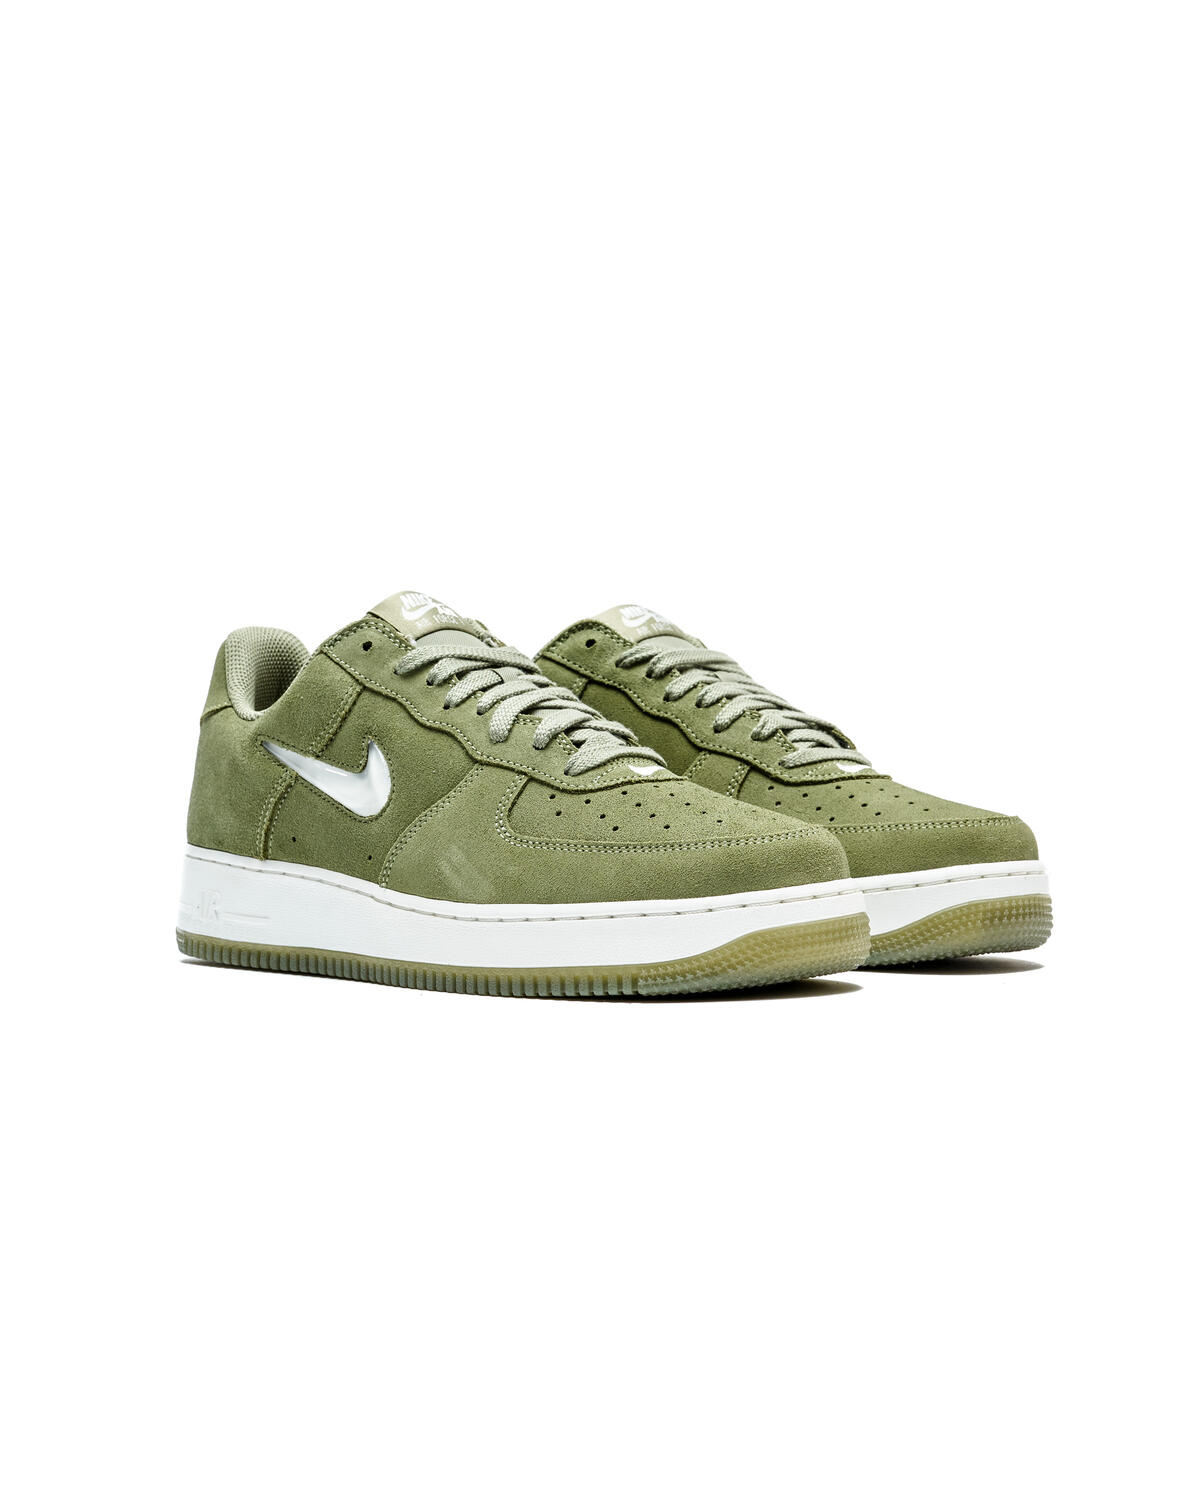 Nike Air Force 1 High 'Oil Green' | Men's Size 9.5